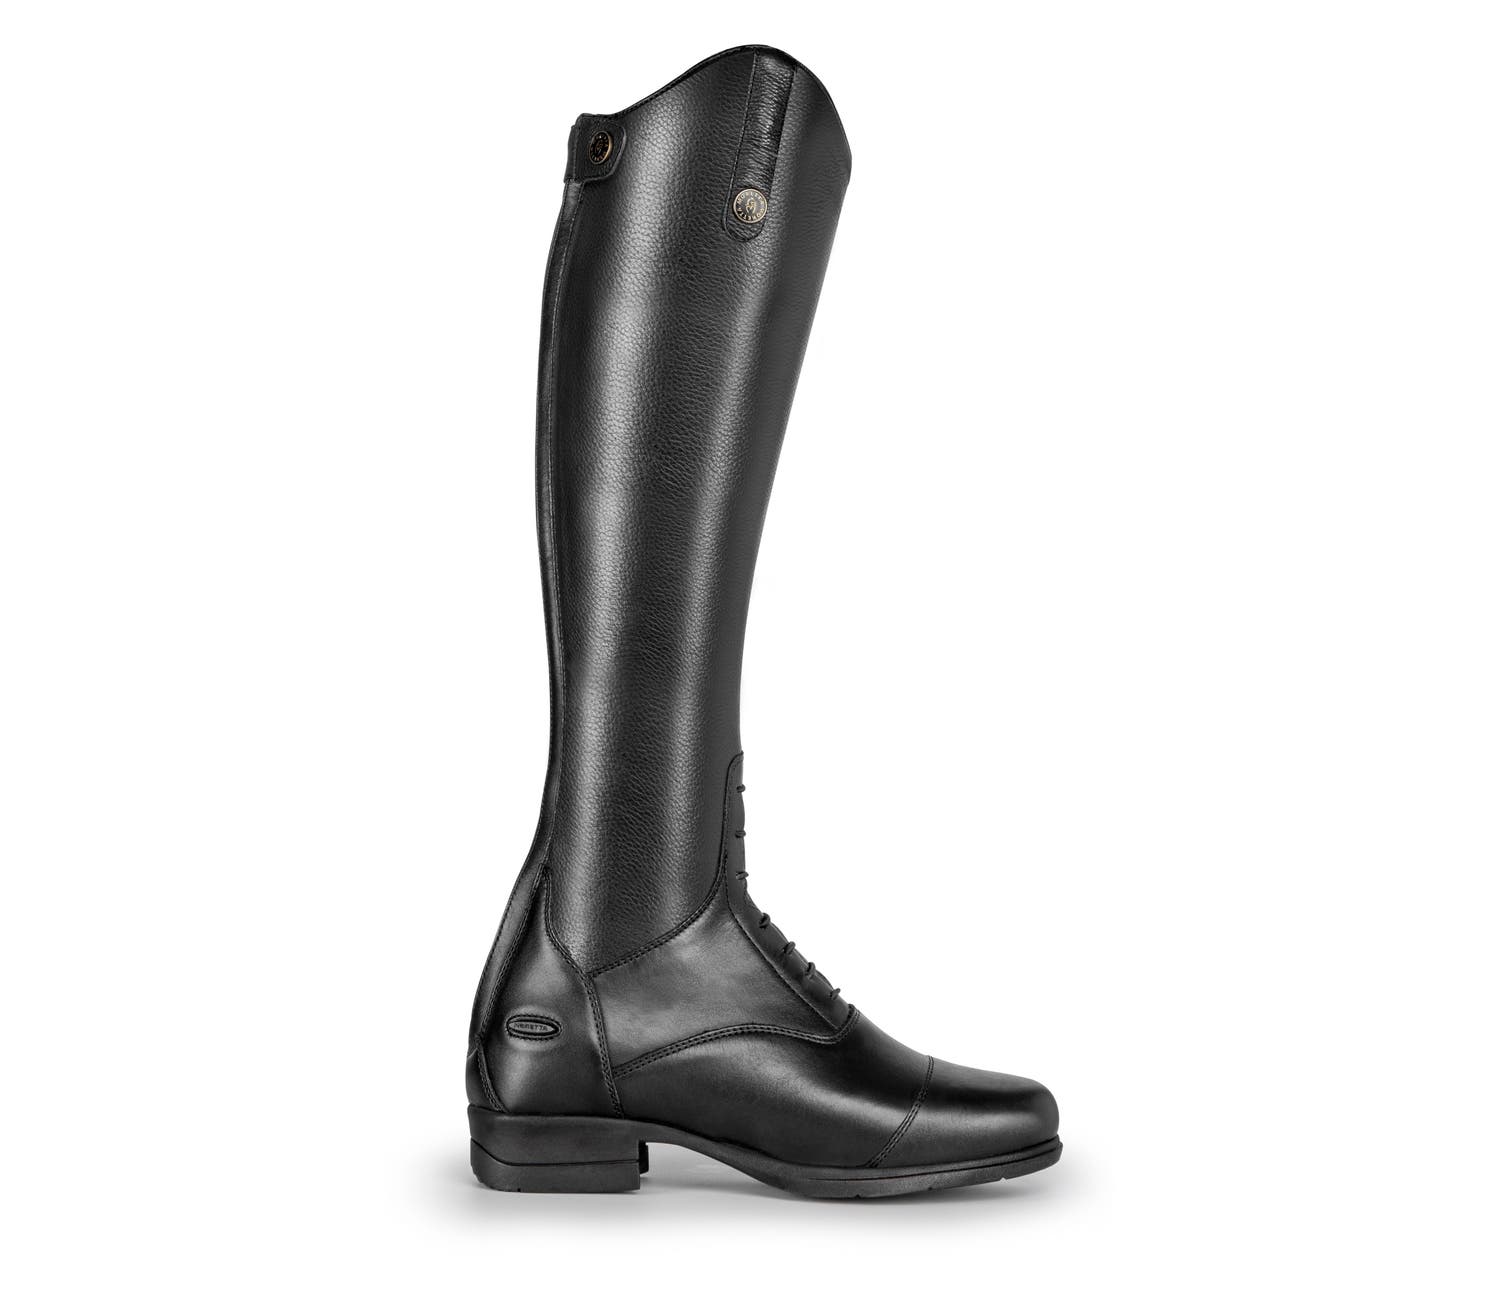 Moretta Gianna Childs Leather Riding Boots